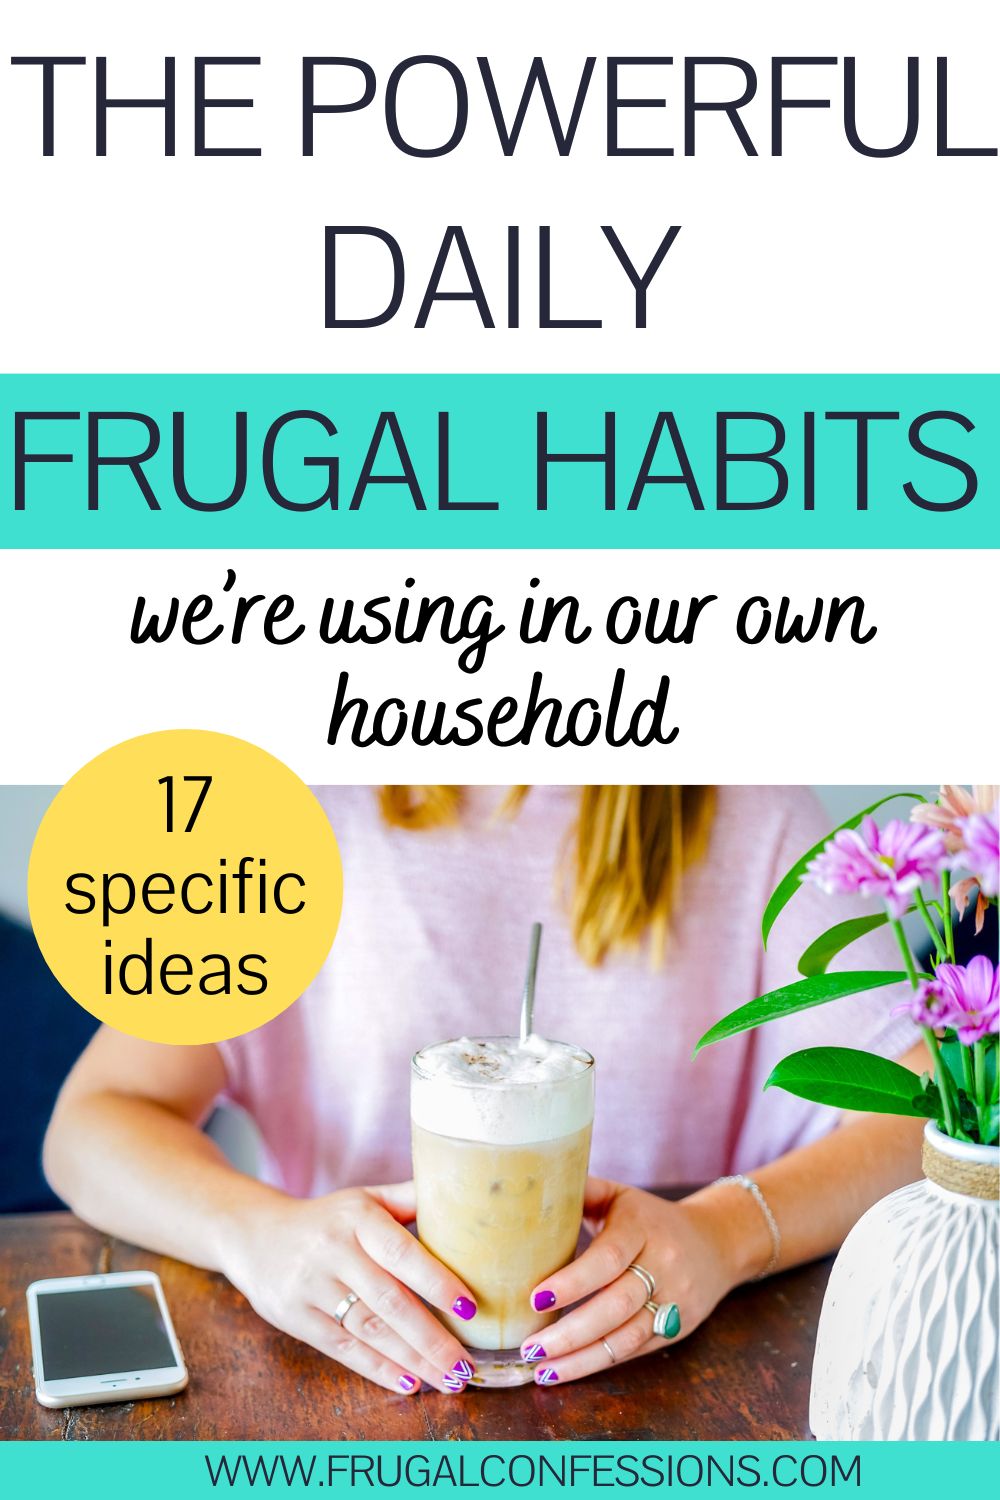 woman with scrumptious looking homemade latte, text overlay "The Powerful Daily Frugal Habits we're using in our own household"